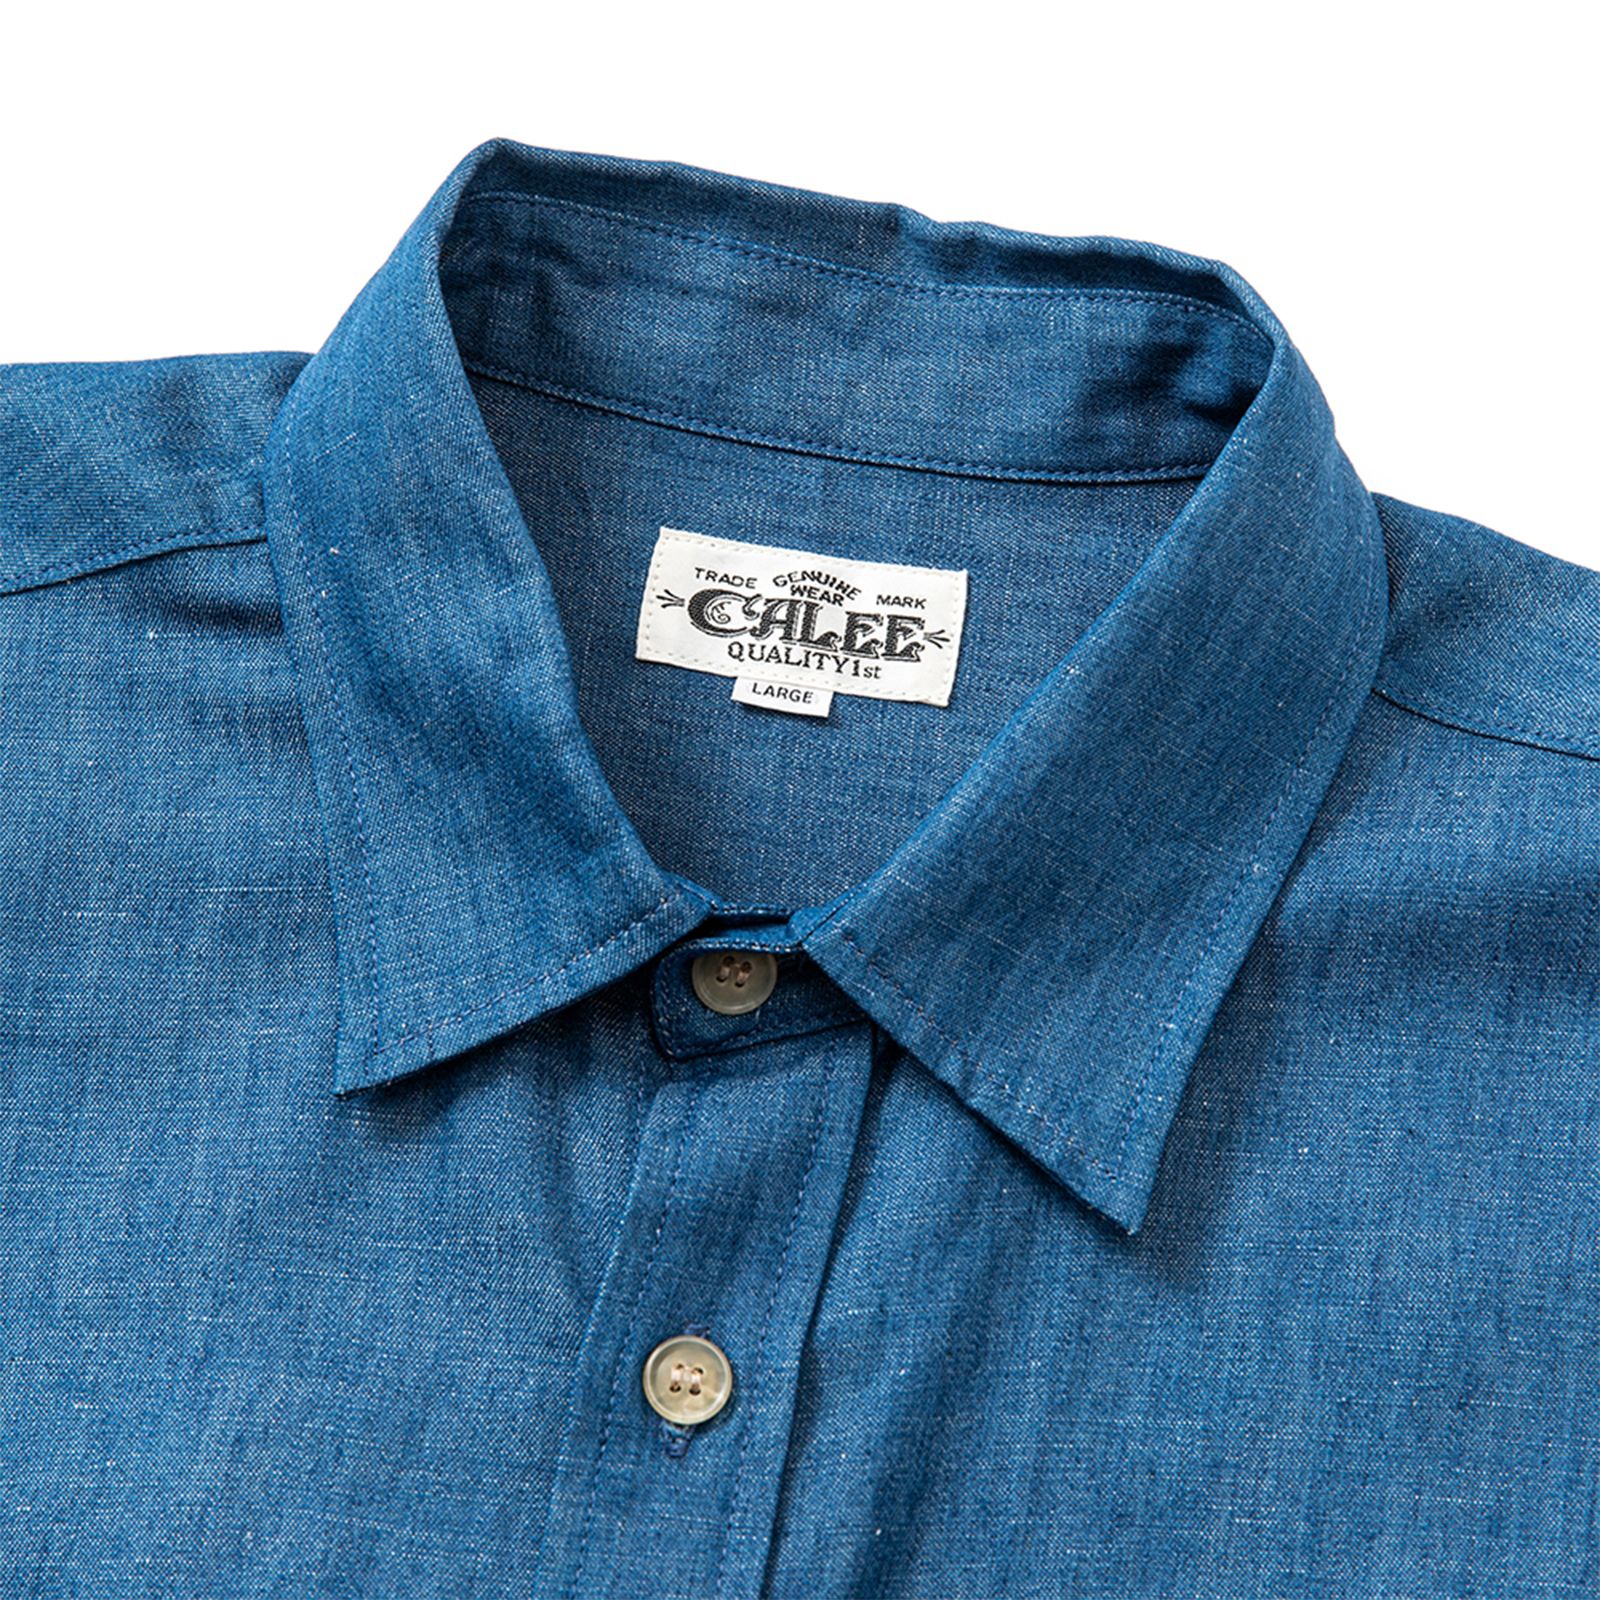 CALEE - 【ラスト1点 L 】C/L Embroidery over silhouette S/S shirt ...